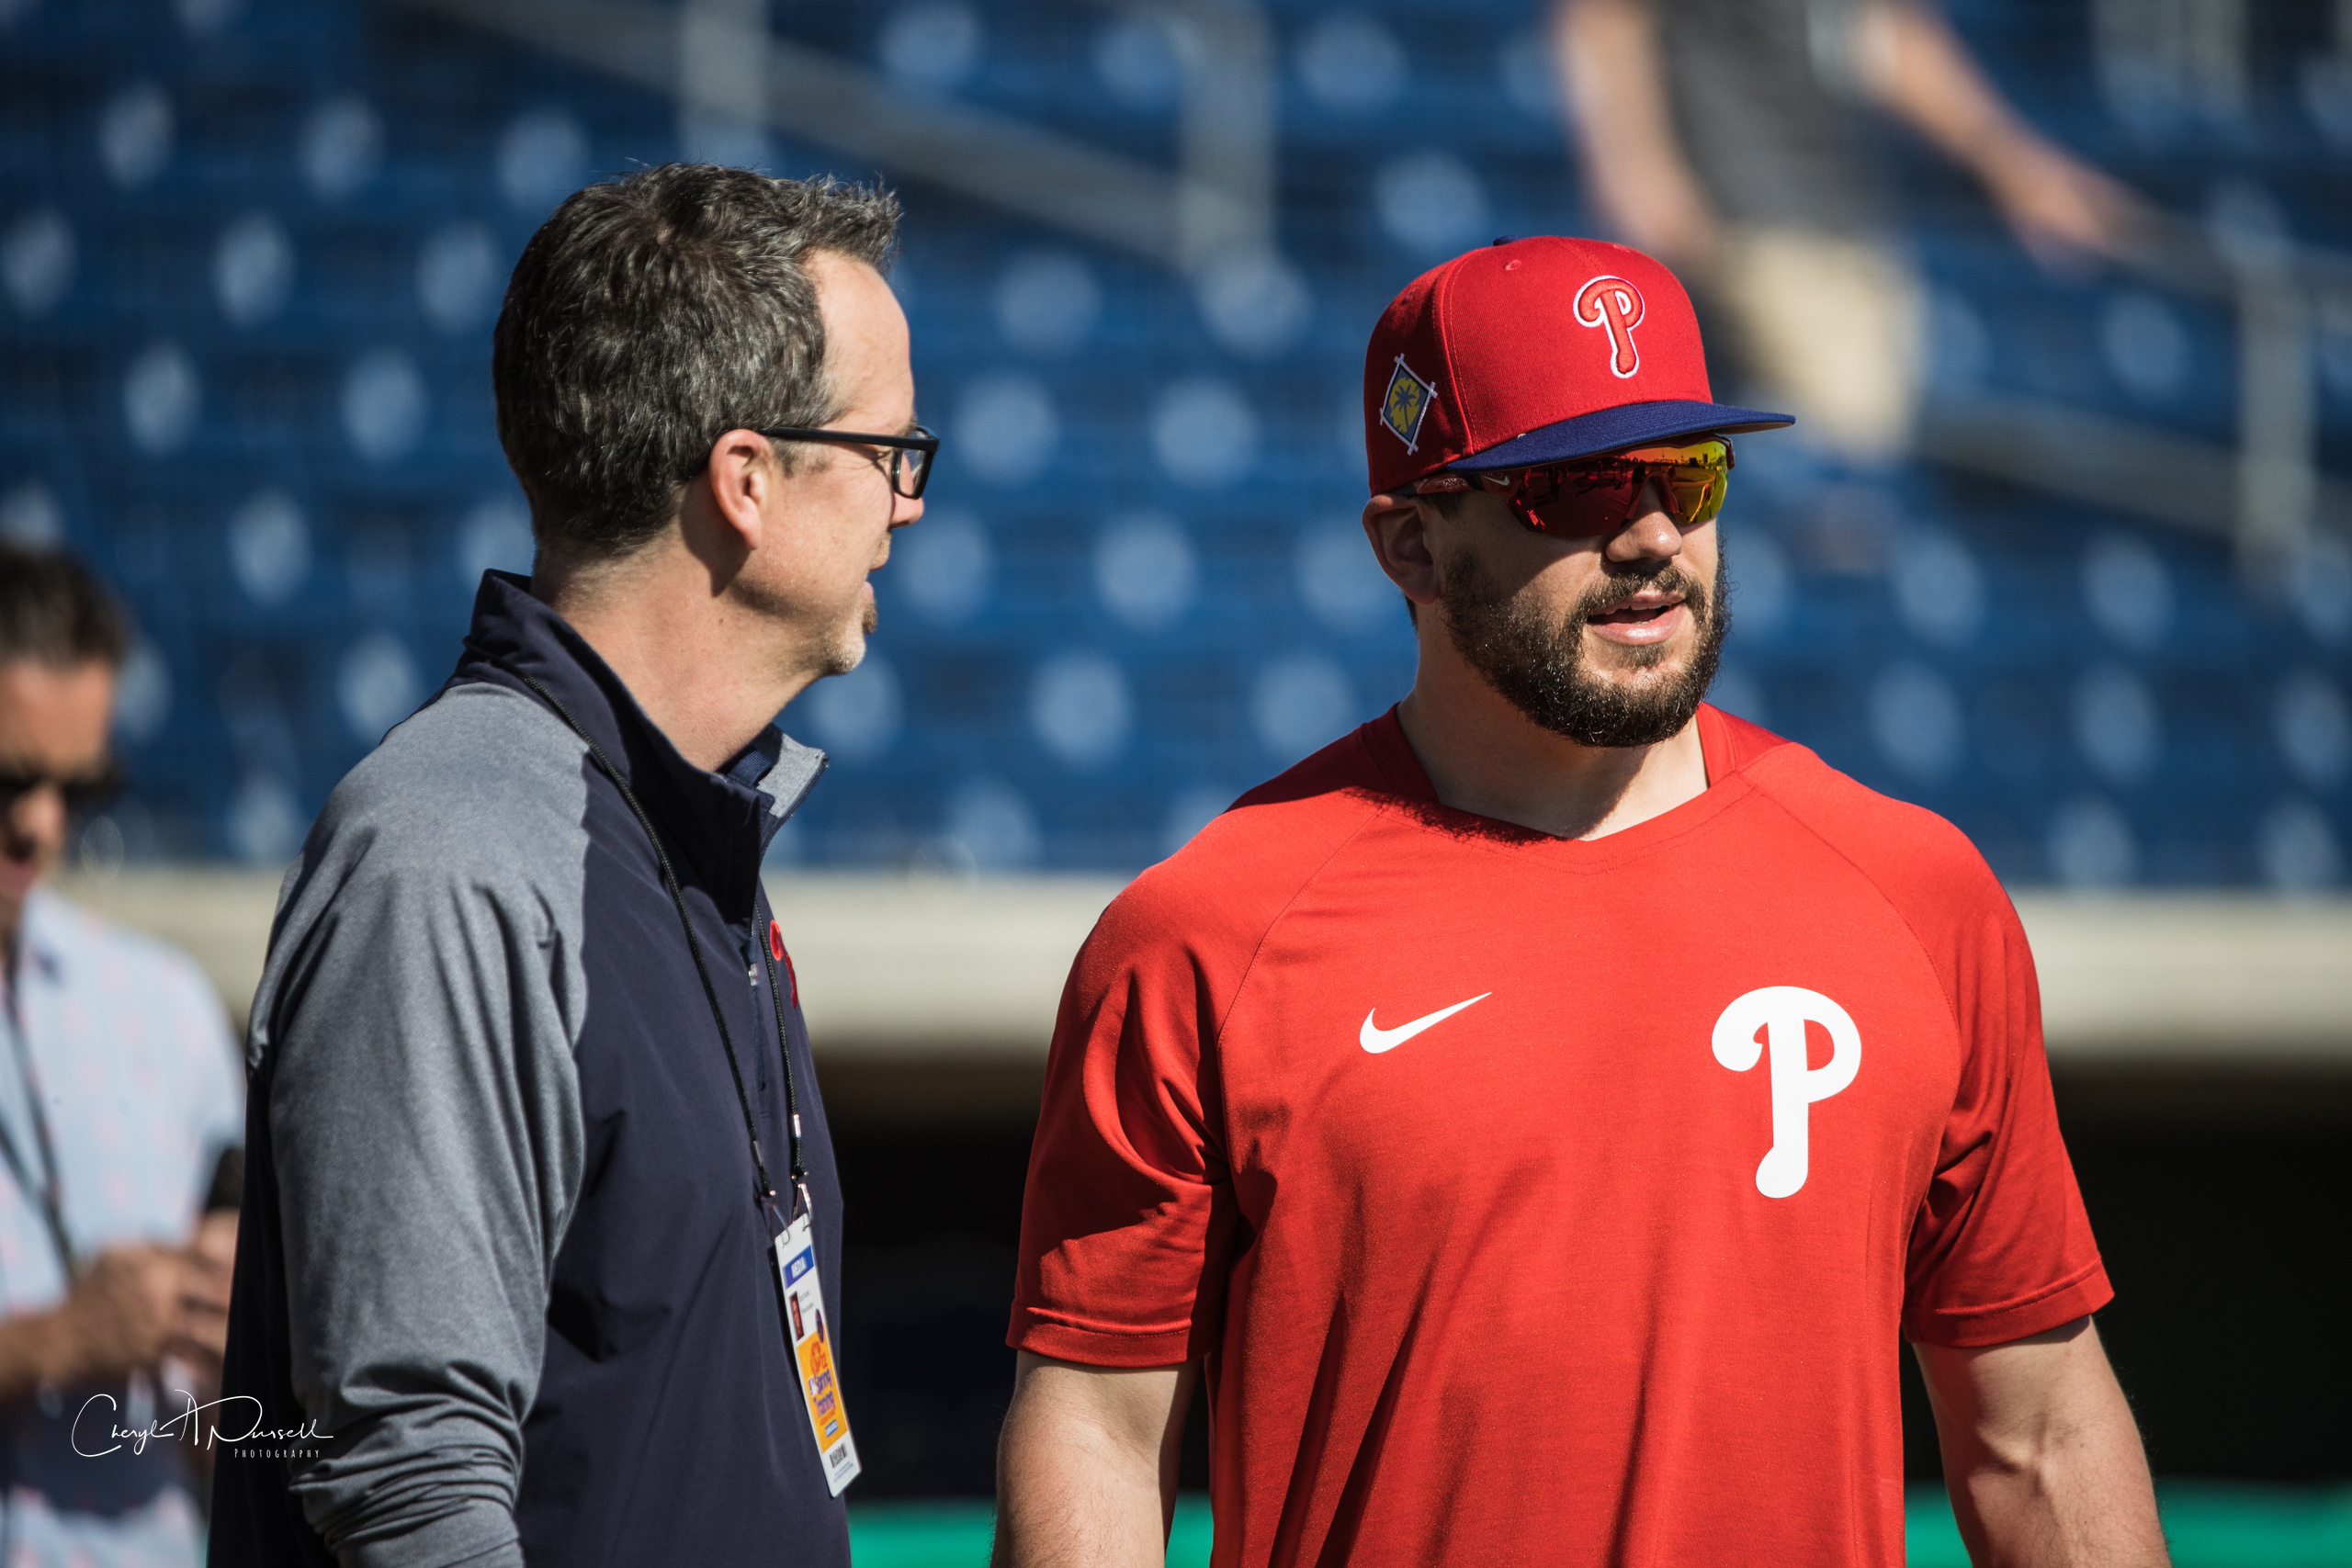 Scott Franzke to join John Kruk on TV broadcasts this weekend  Phillies  Nation - Your source for Philadelphia Phillies news, opinion, history,  rumors, events, and other fun stuff.